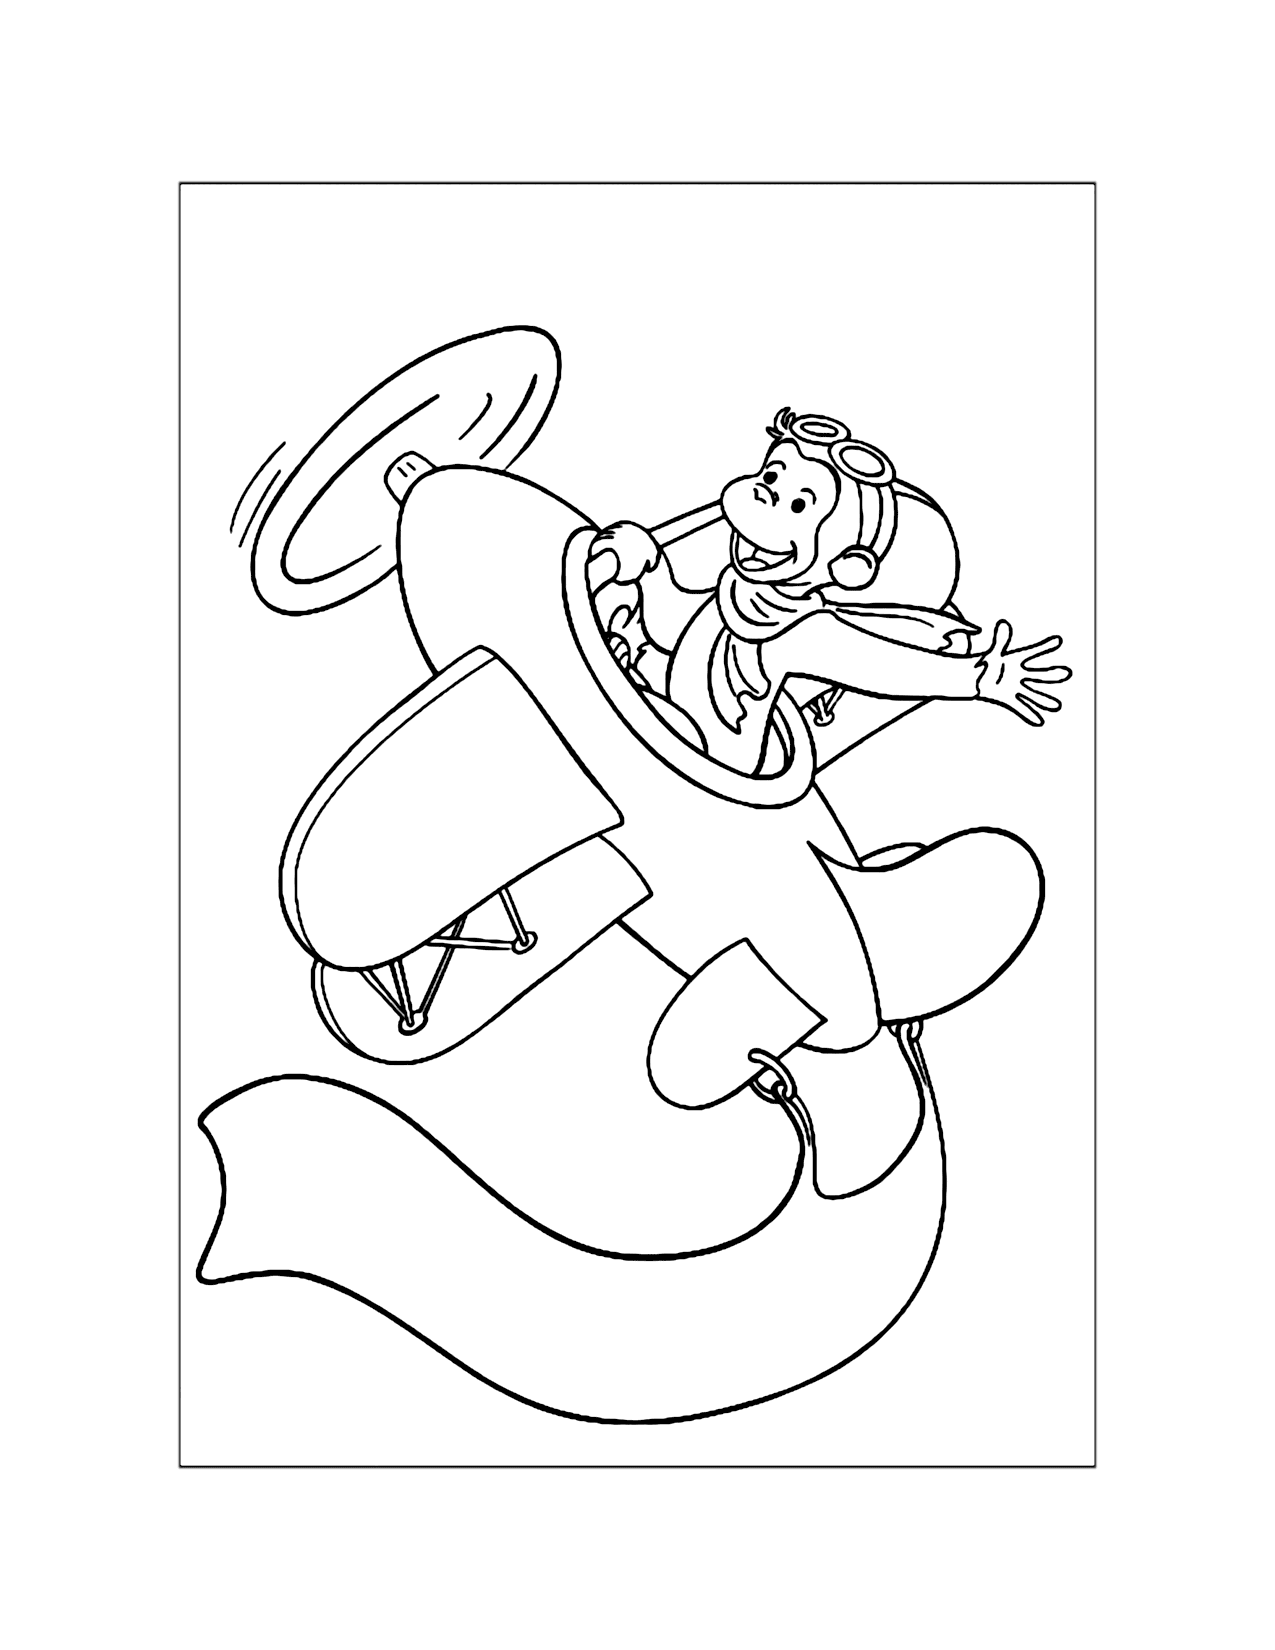 Curious George Flying An Airplane Coloring Page